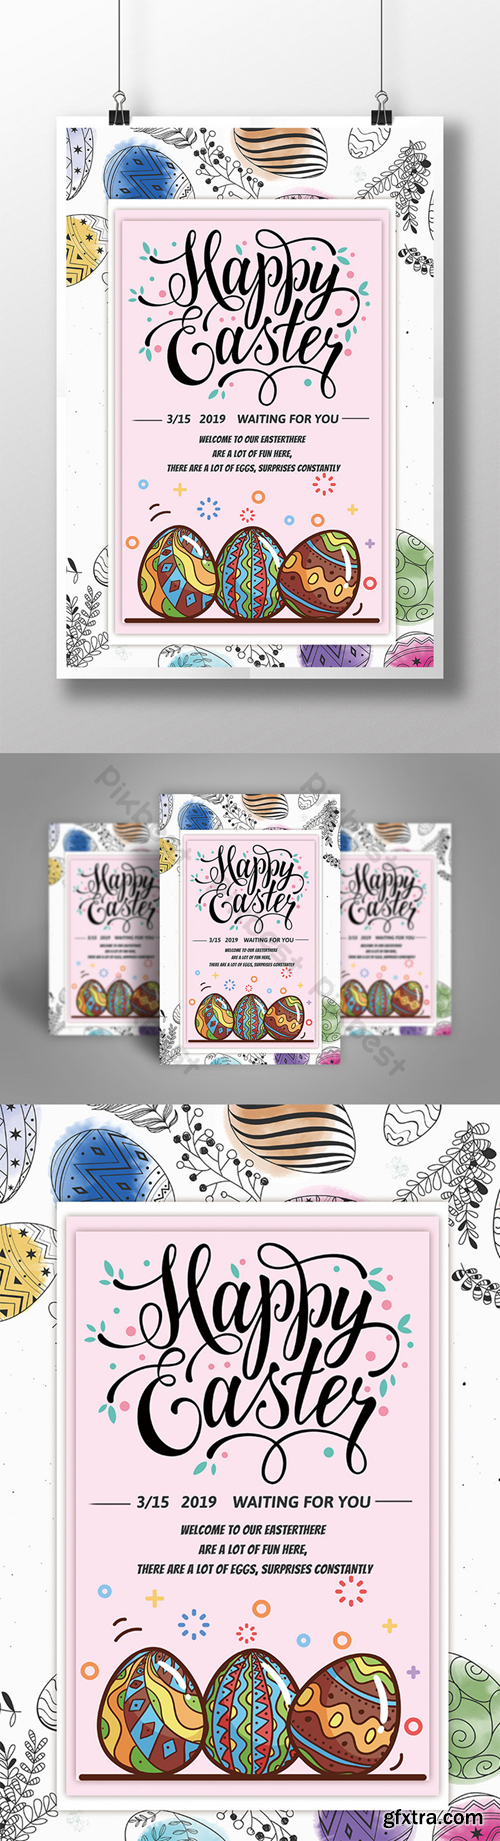 Happy Easter Festival Promotional Poster Template PSD